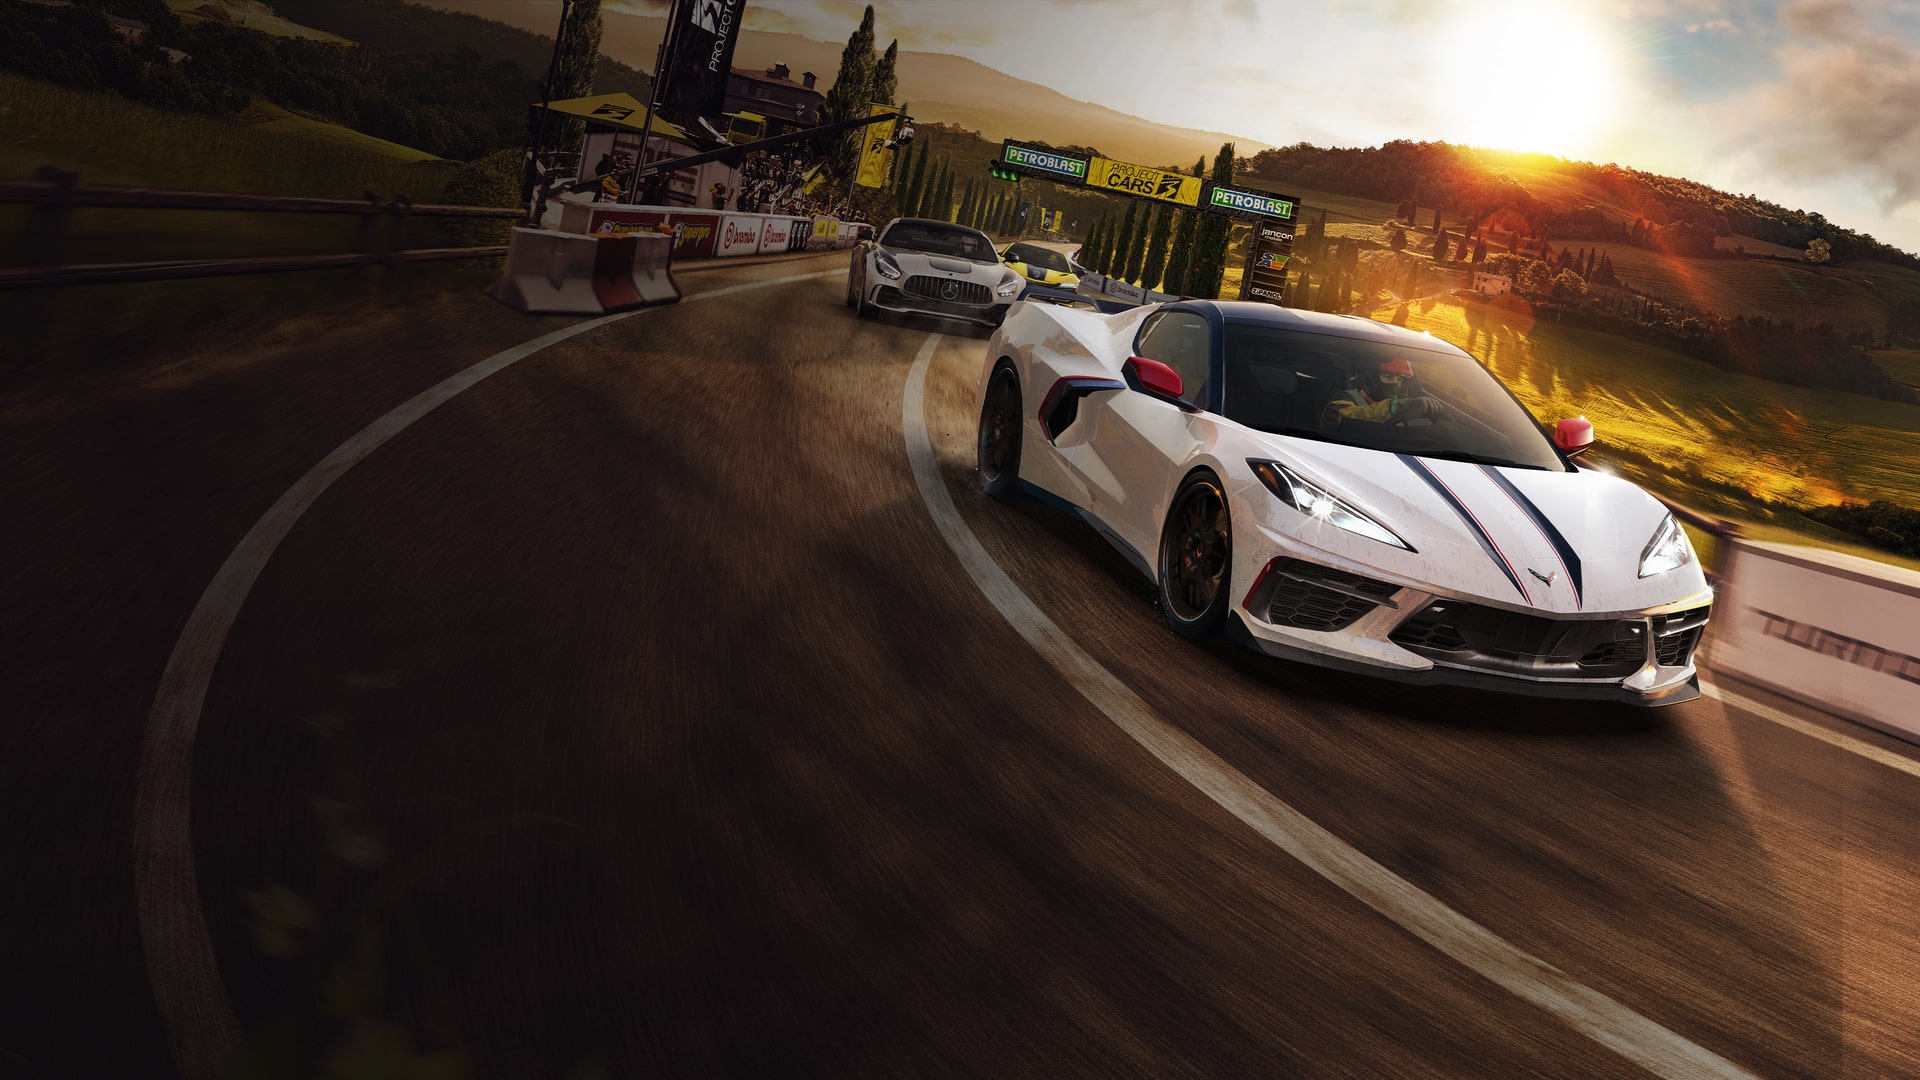 Buy Project CARS 3: Power Pack - Microsoft Store en-IL